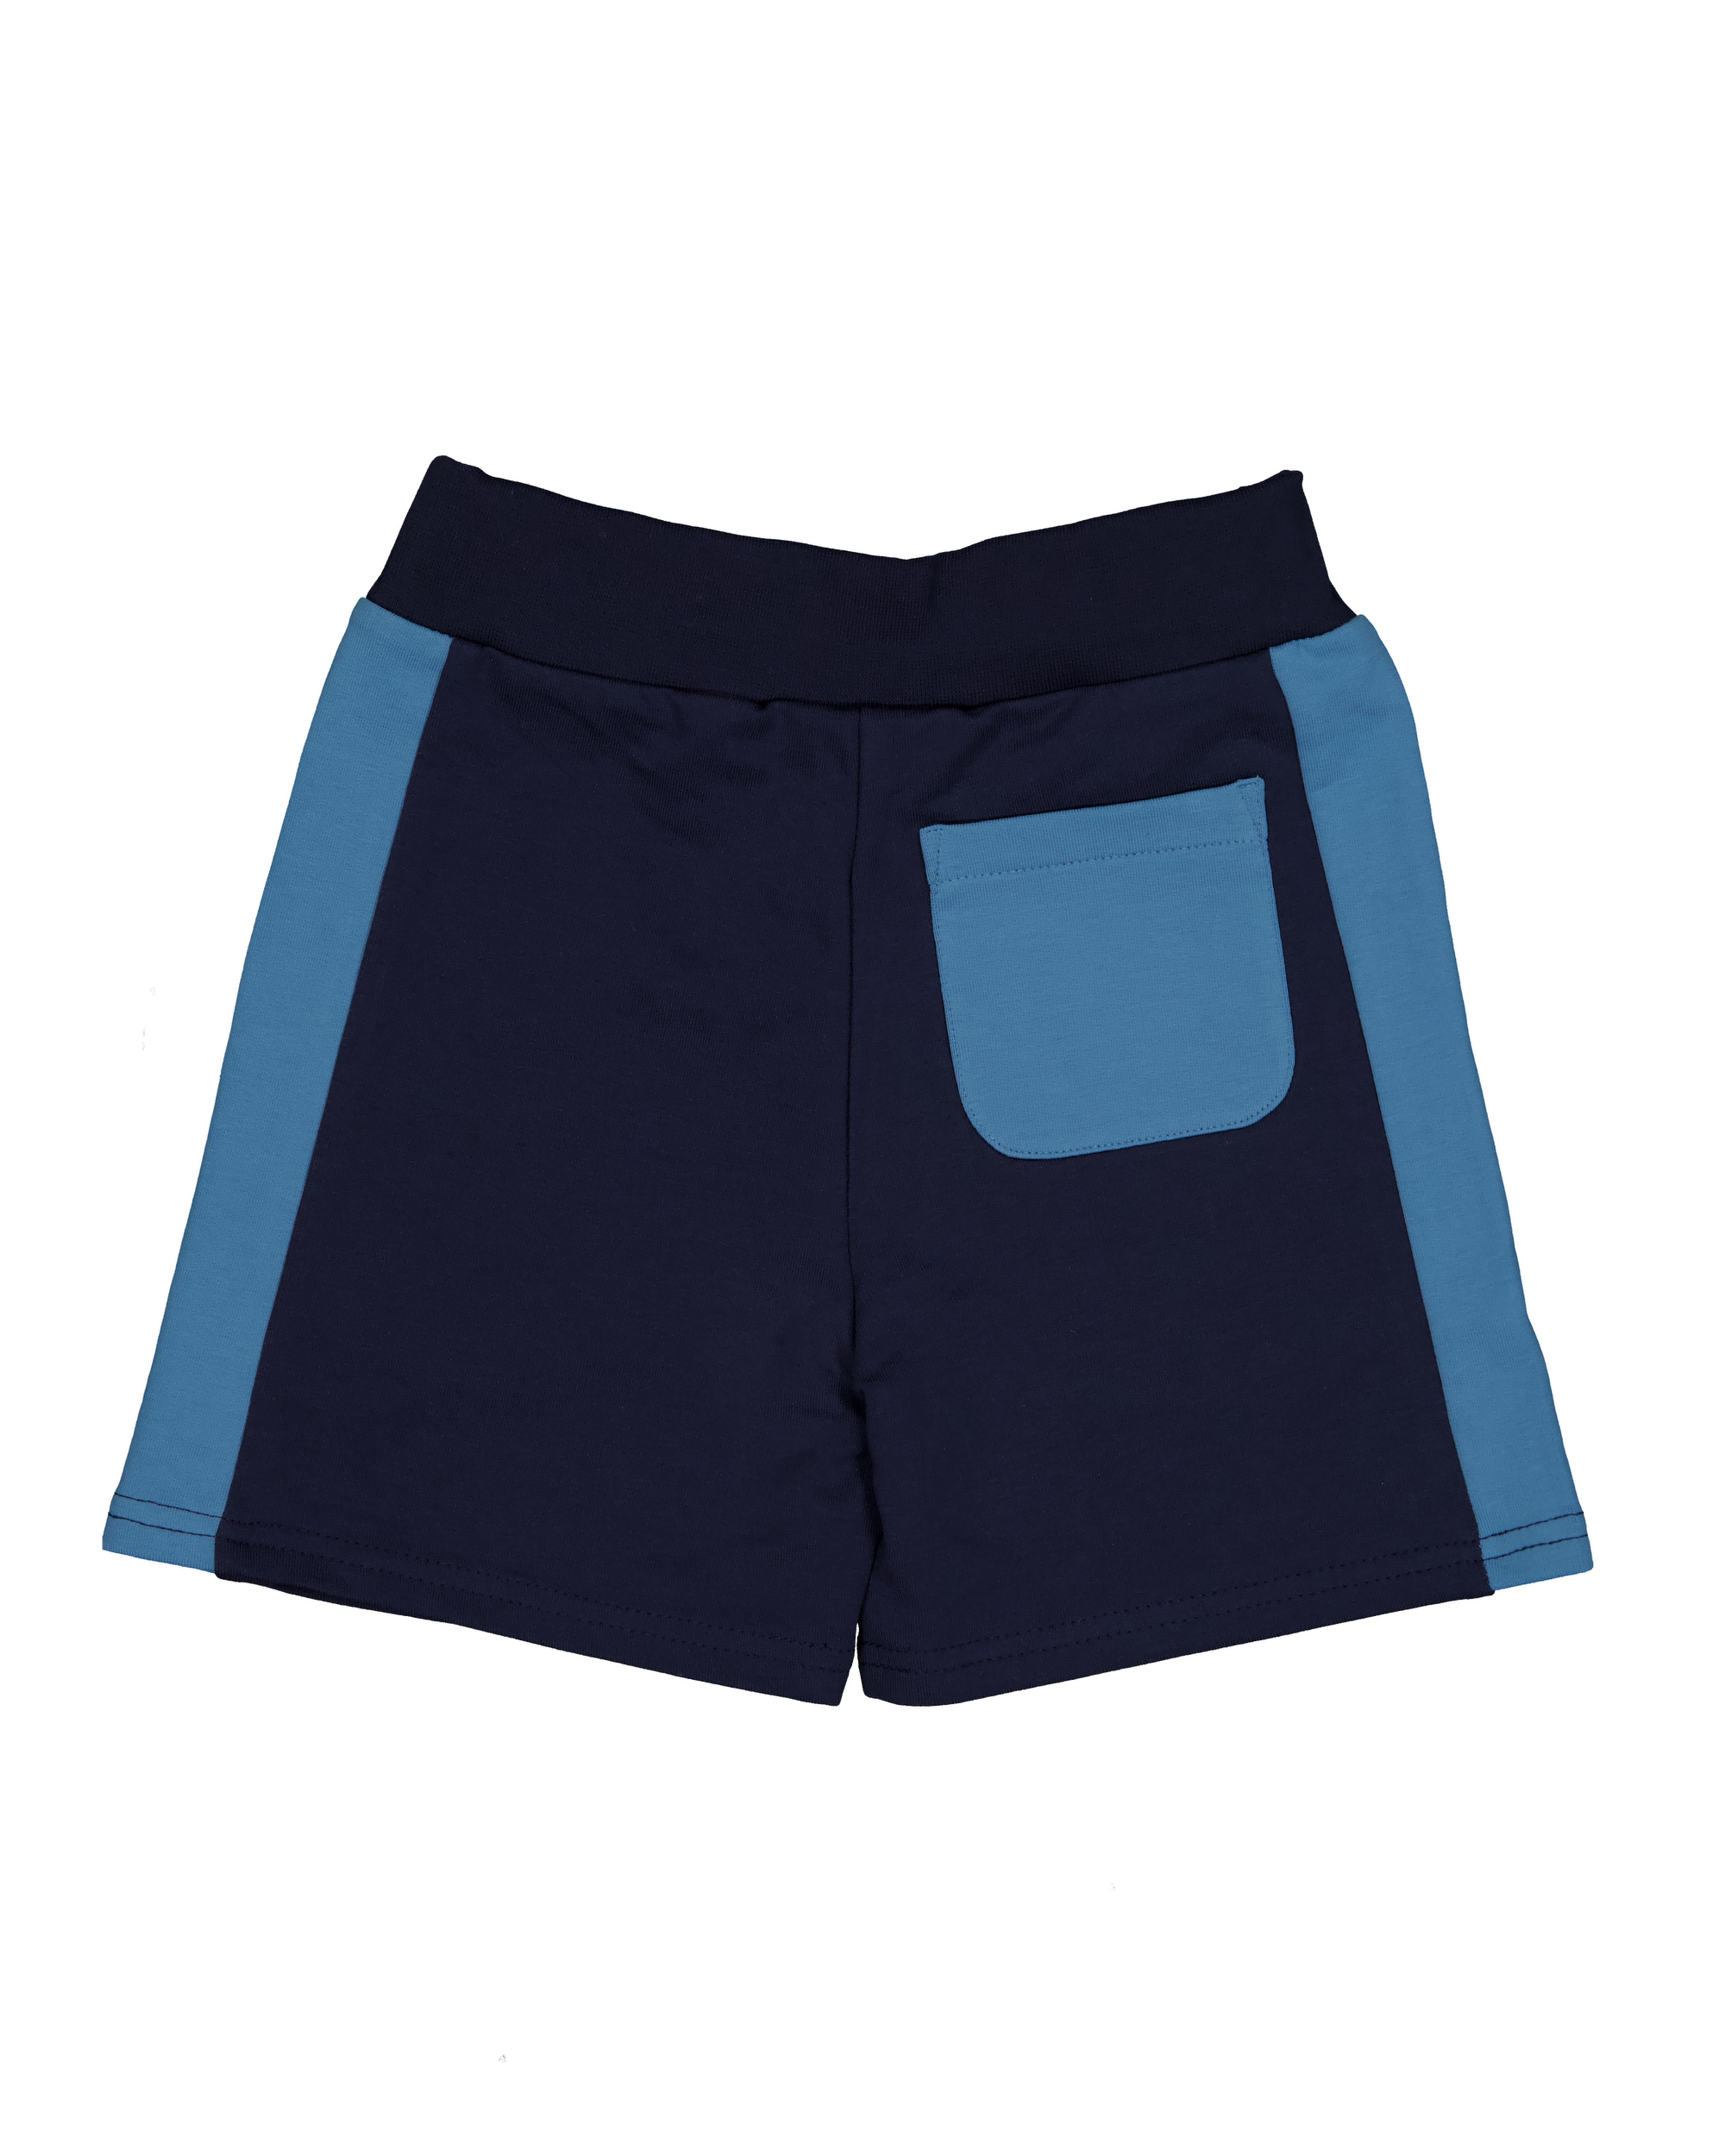 College shorts Navy